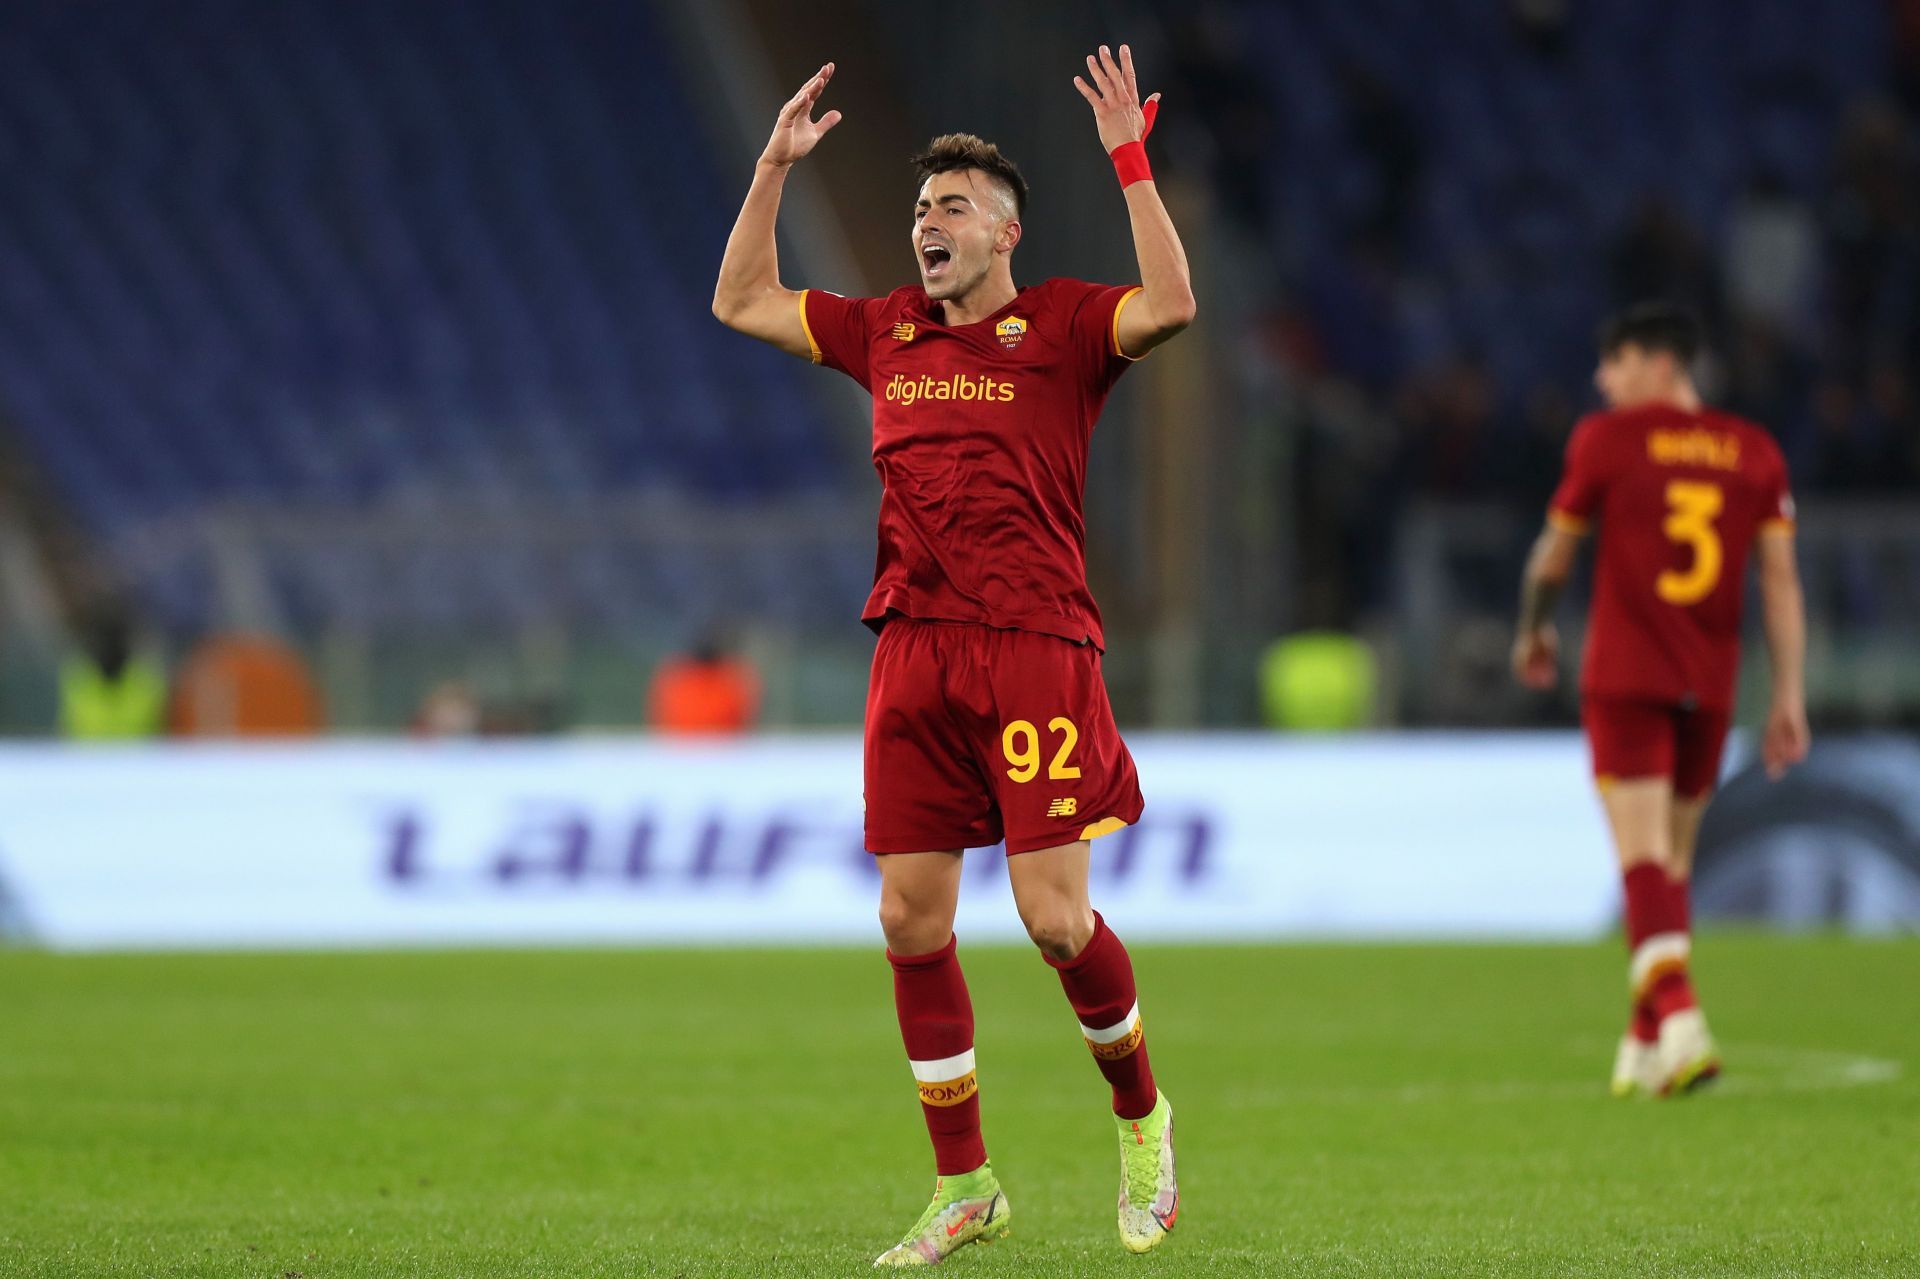 Roma play Venezia on Sunday in Serie A